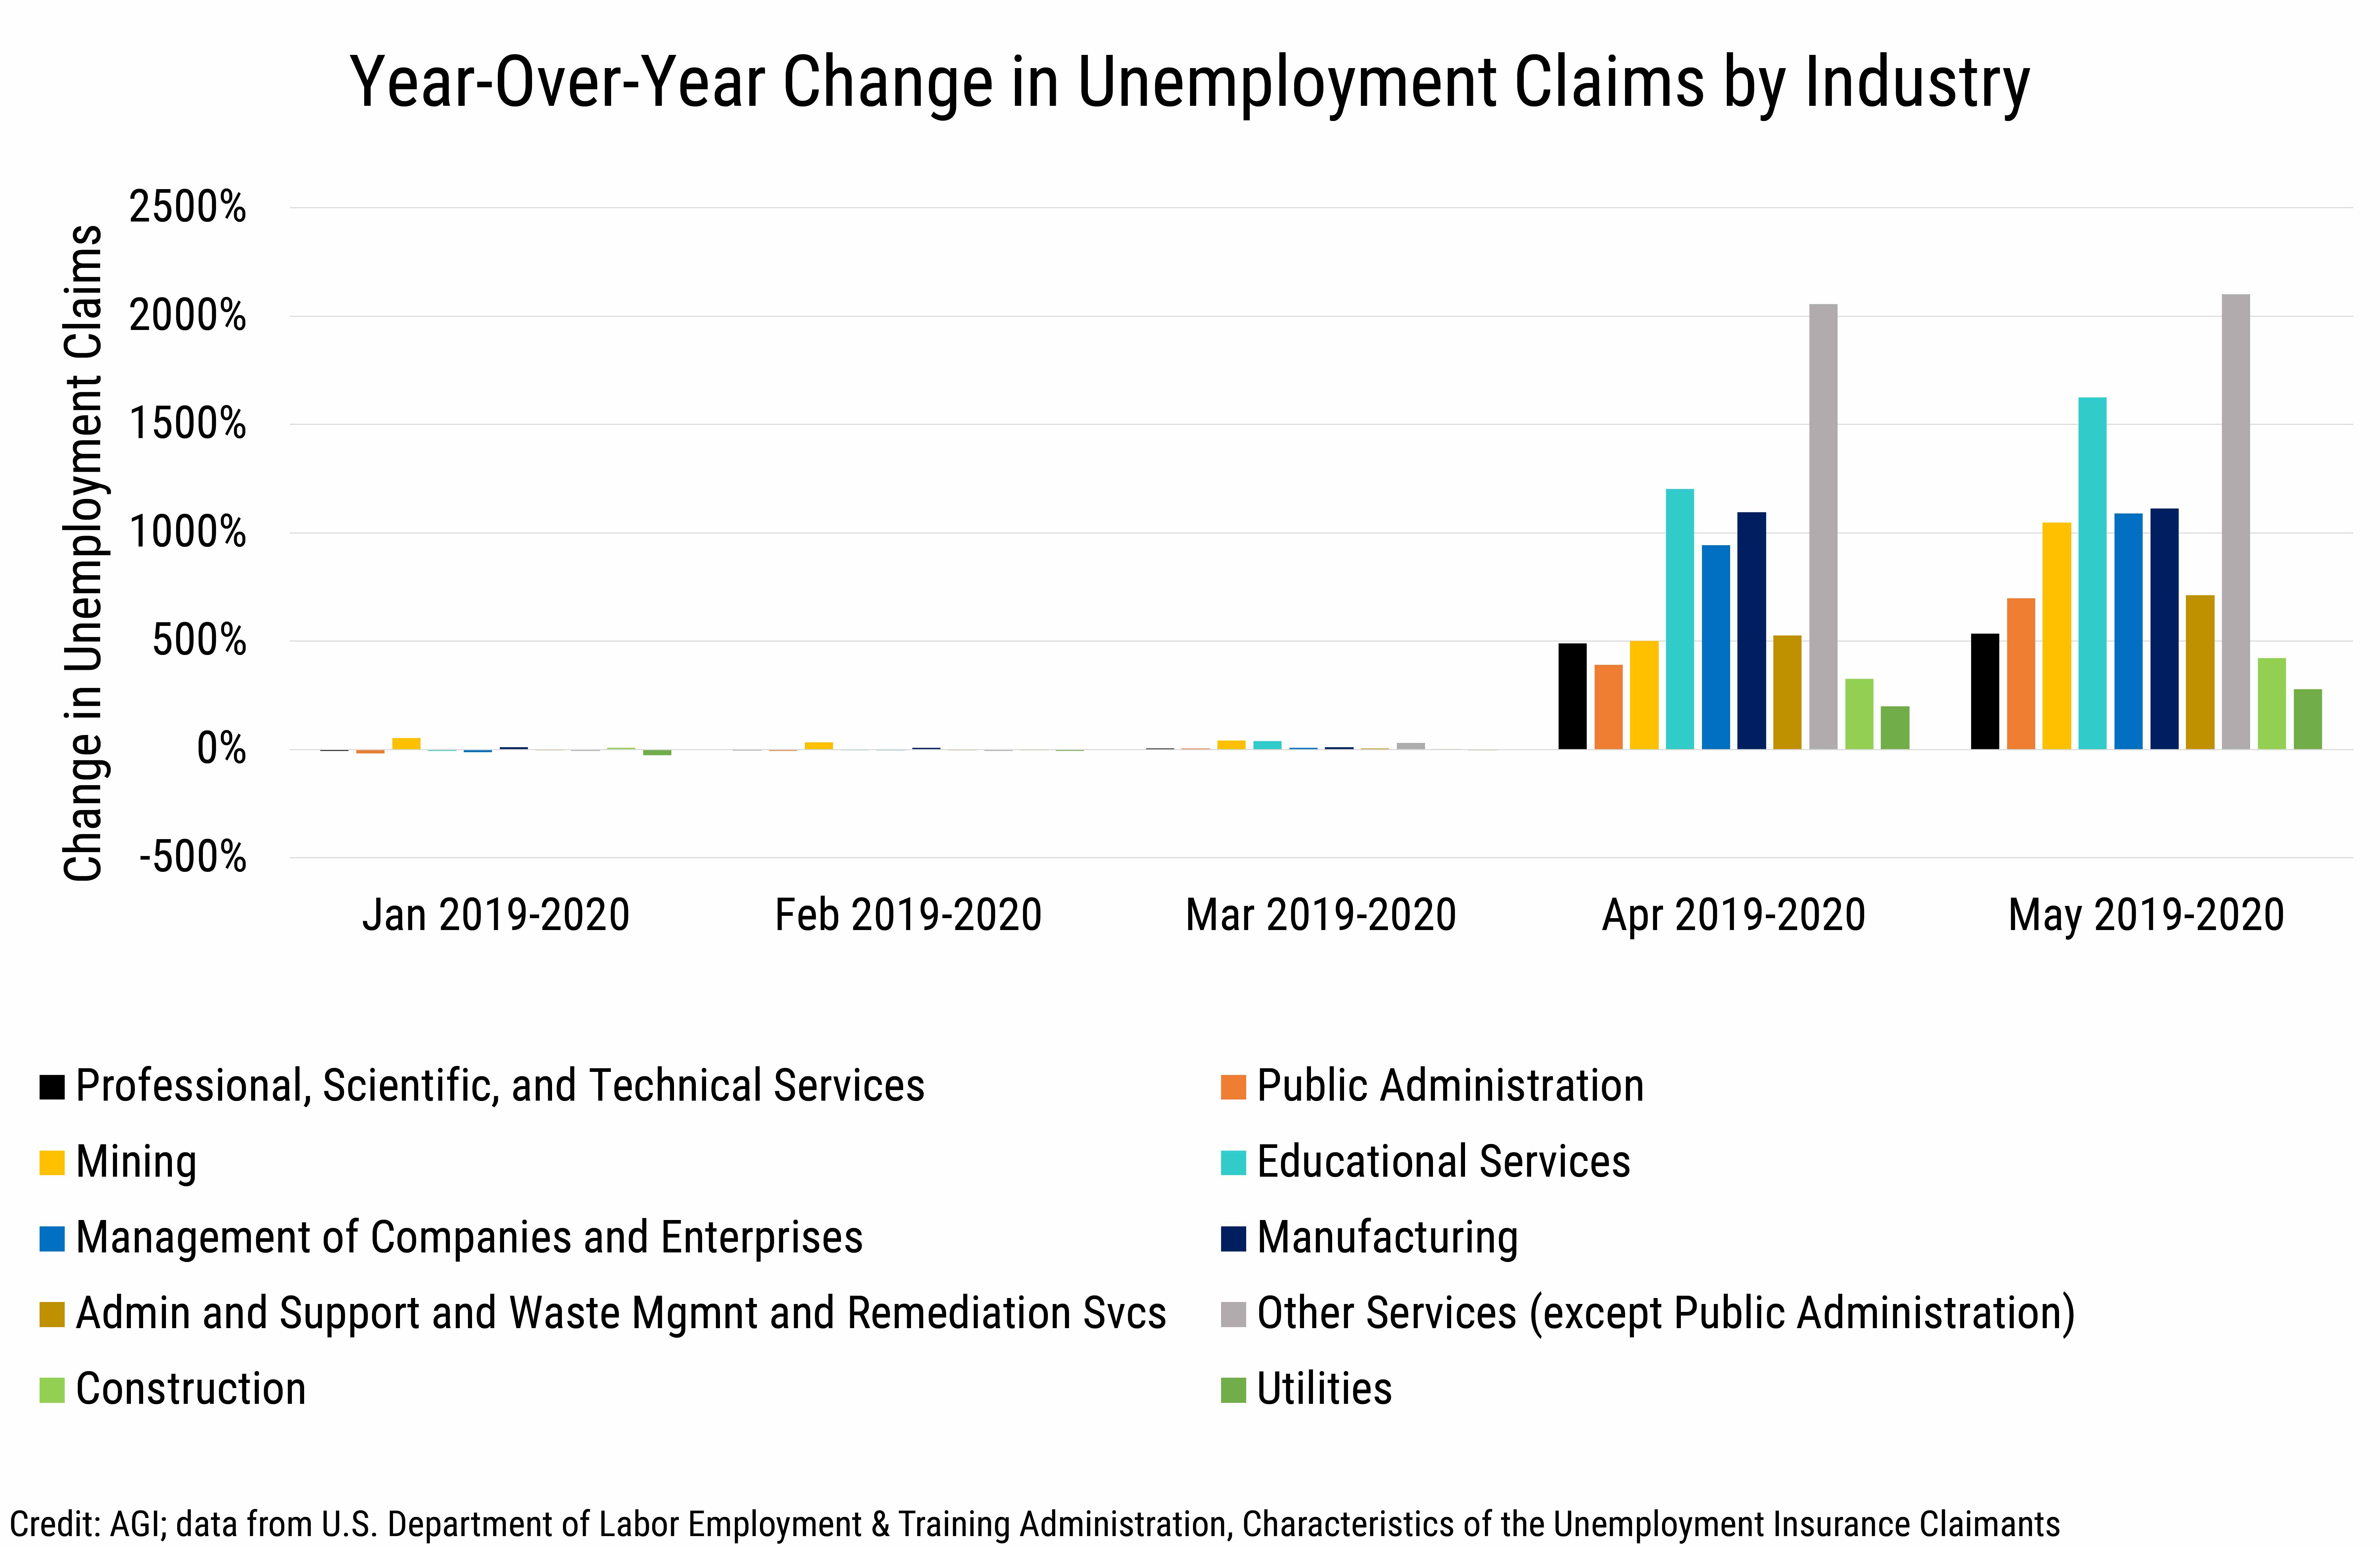 Data Brief 2020-013_rev20201119 chart-03: Year-Over-Year Change in Unemployment Claims by Industry (Credit: AGI, data derived from the U.S. Department of Labor Employment & Training Administration, Characteristics of the Unemployment Insurance Claimants)